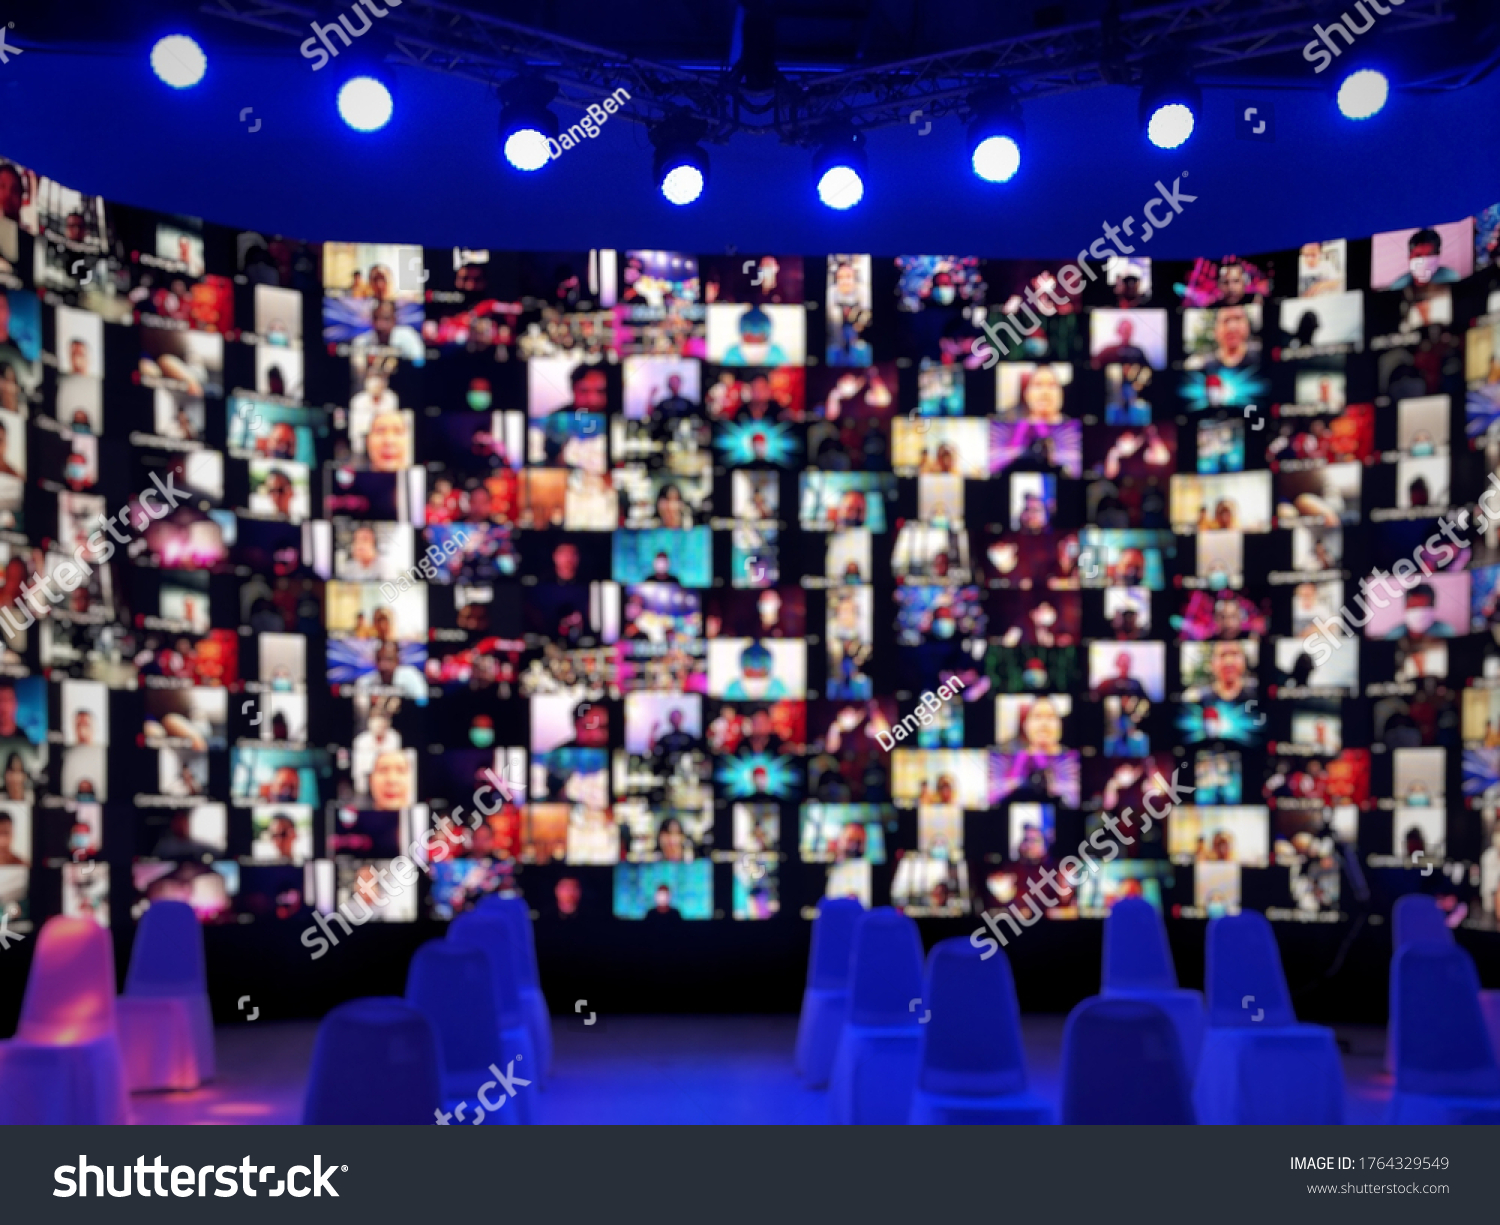 Blur large LED screen show many people's faces join big online event or virtual reality live conference. Video conference, Work from home, Social distancing, New normal event production.  #1764329549